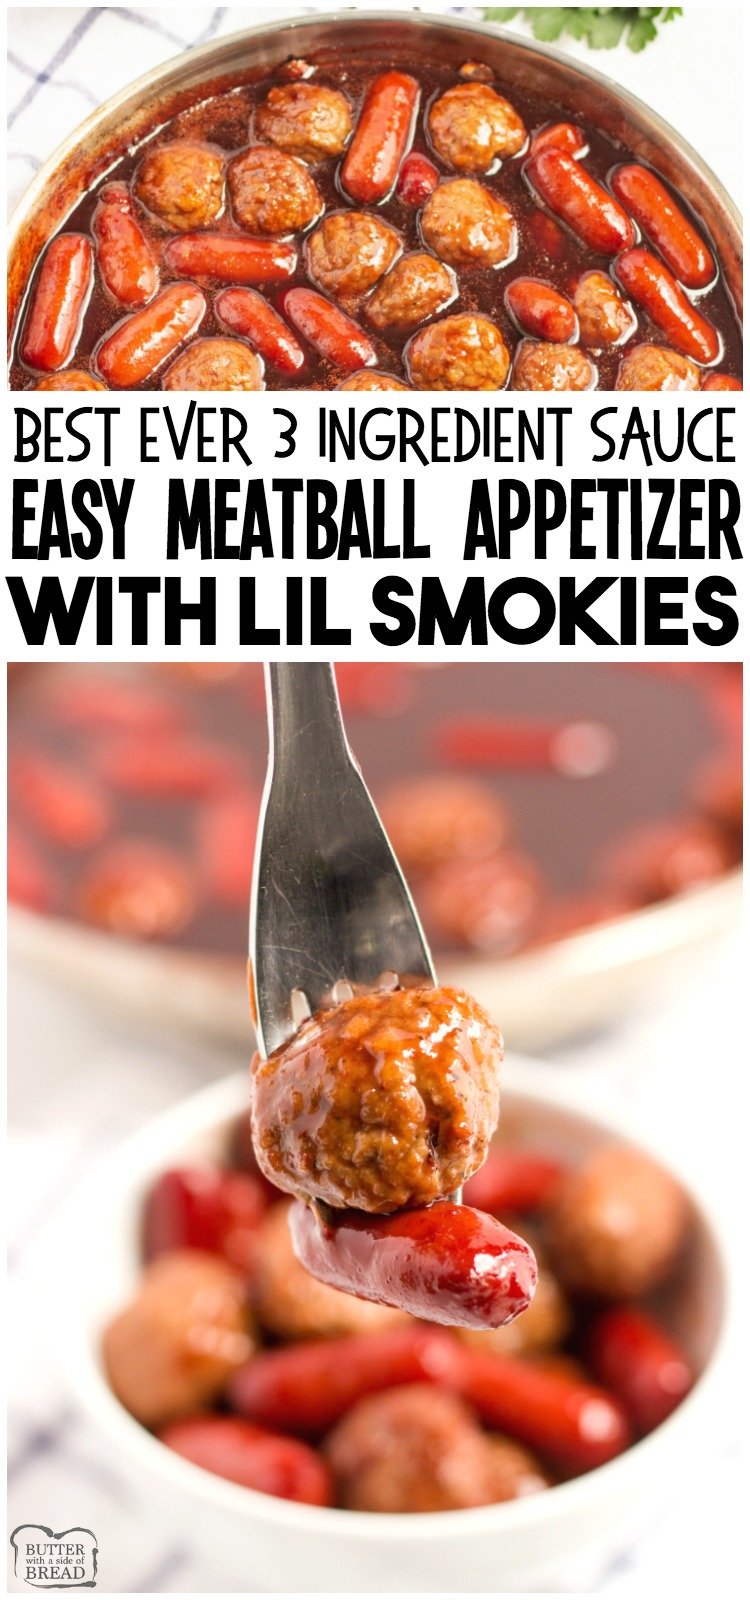 Easy Meatball appetizer recipe made with an incredible 3 ingredient sauce that everyone raves about! Combine frozen meatballs & Lil Smokies in this simple & delicious appetizer recipe perfect for parties. #appetizer #meatballs #bbq #grapejelly #meatballs #appetizers #recipe from BUTTER WITH A SIDE OF BREAD